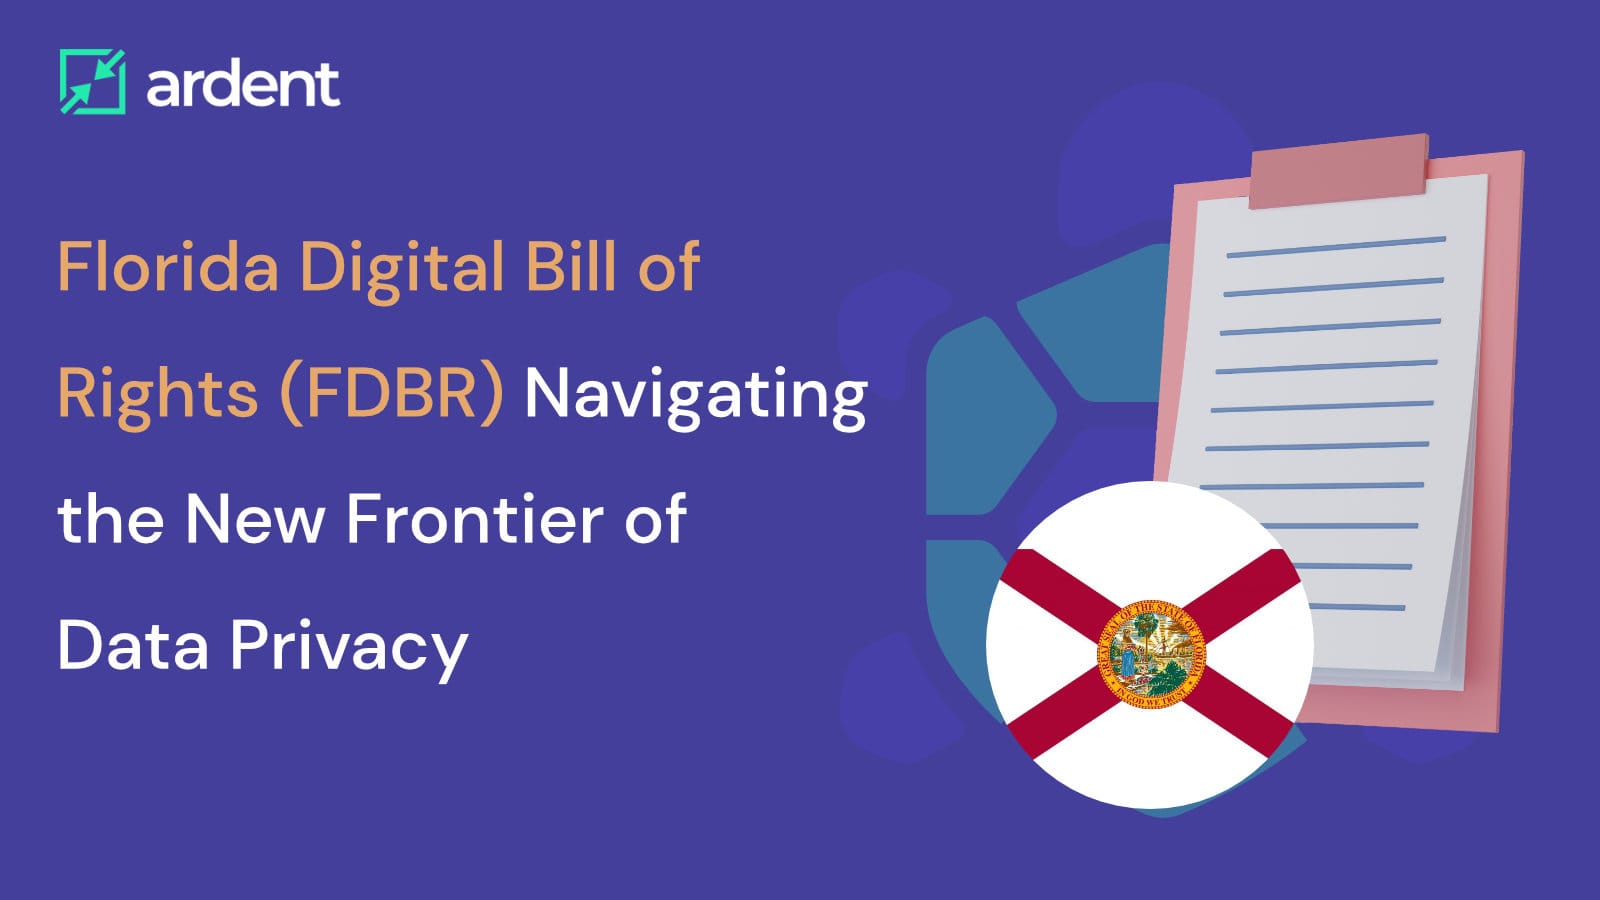 The Florida Digital Bill of Rights (FDBR): Navigating the New Frontier of Data Privacy